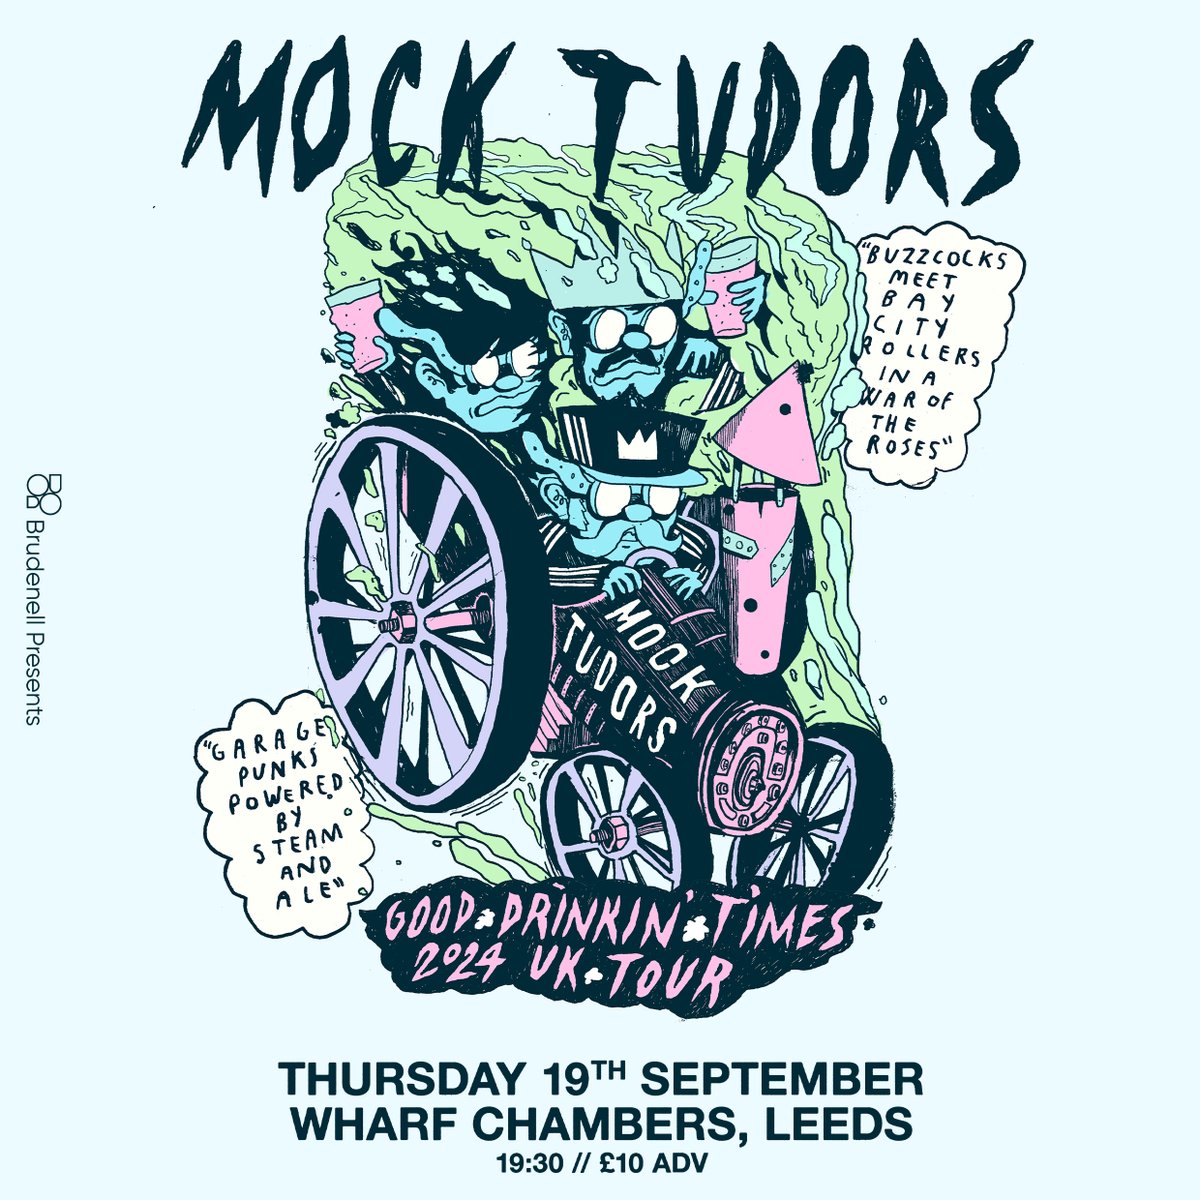 'South Yorkshire's answer to Buzzcocks meet The Sweet’ - @mocktudors return to Leeds for a show at @WharfChambersCC on 19th September! 🤴 Tickets are on sale now - don't go waiting about, this is a party you don't want to miss out on. 🎟️ 👇 ➡️ bit.ly/MockTudors-LDS